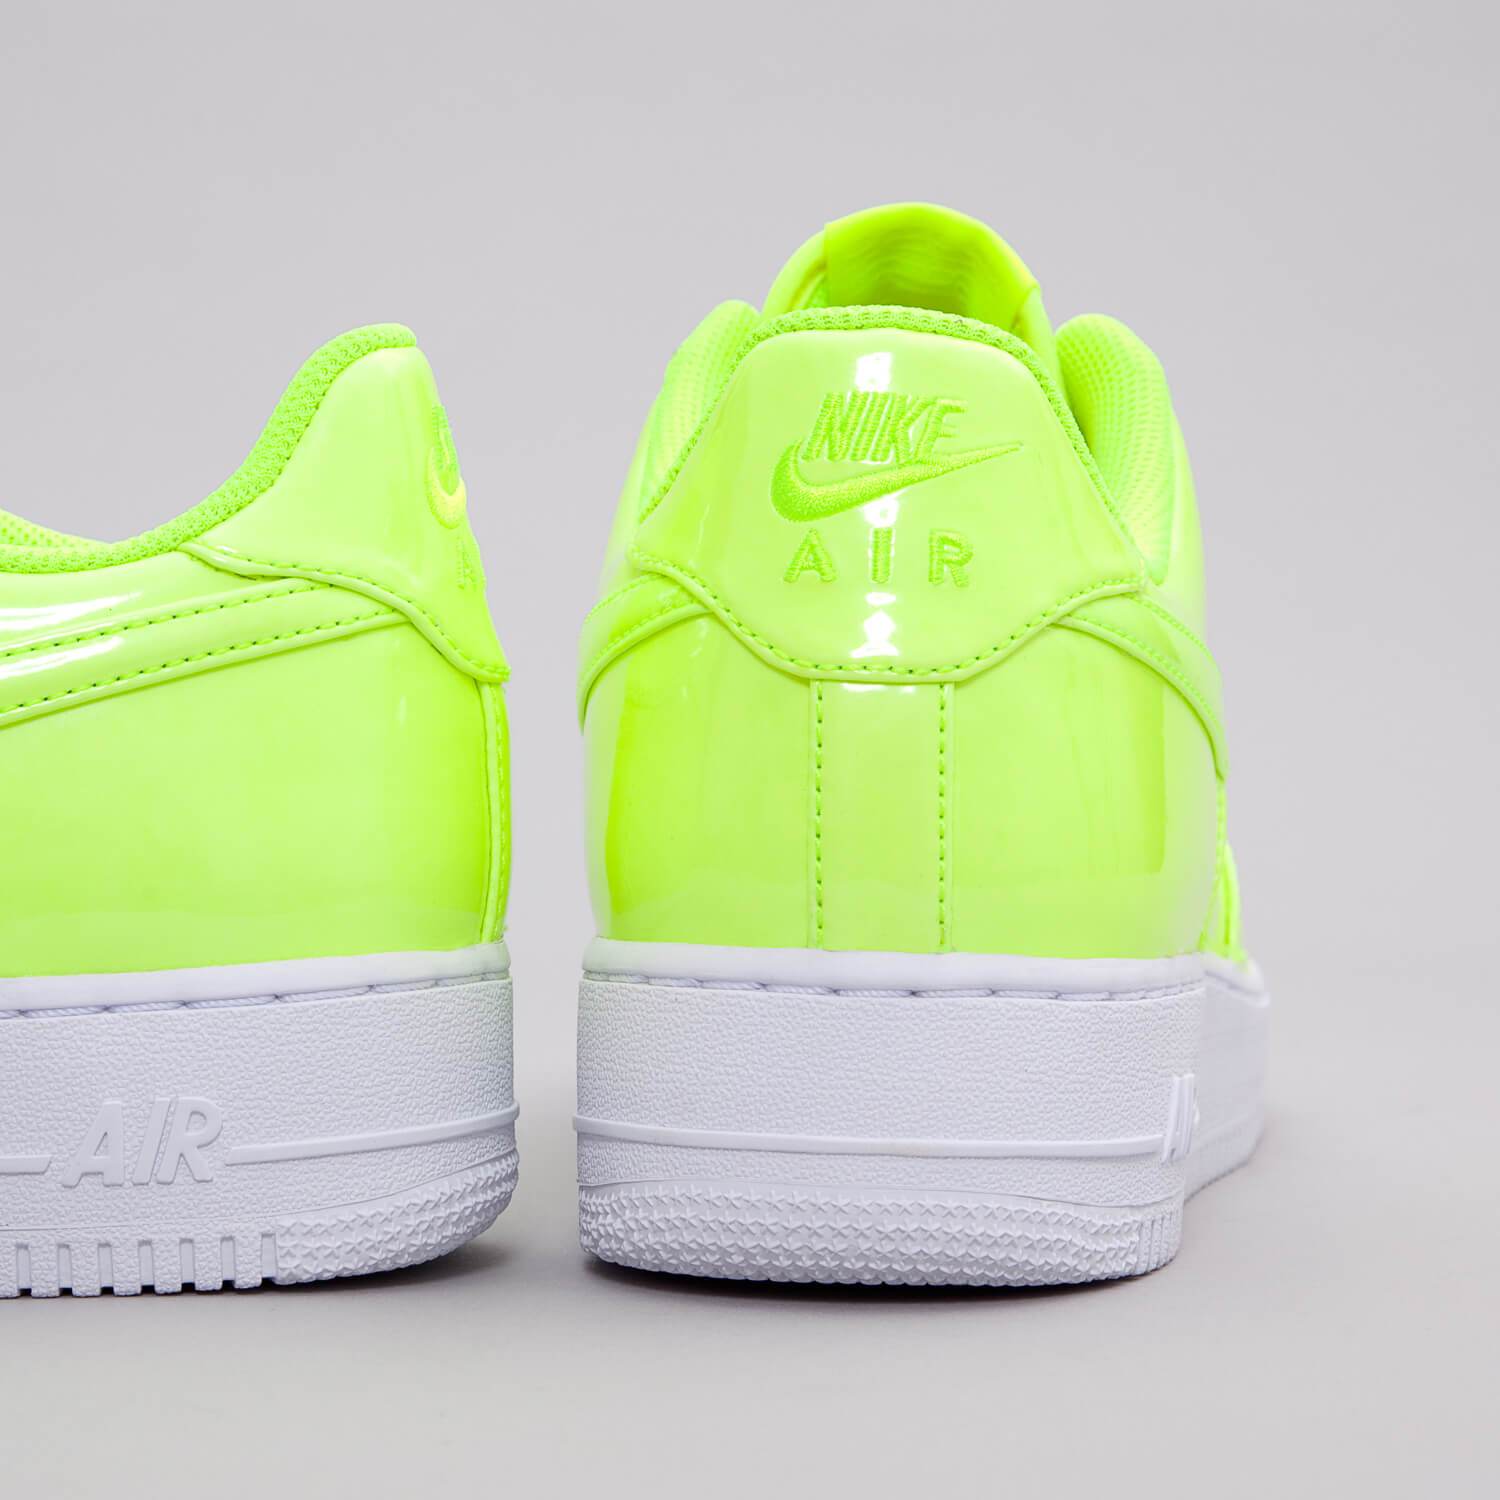 Nike Air Force 1 '07 LV8 UV Volt 2018 for Sale, Authenticity Guaranteed